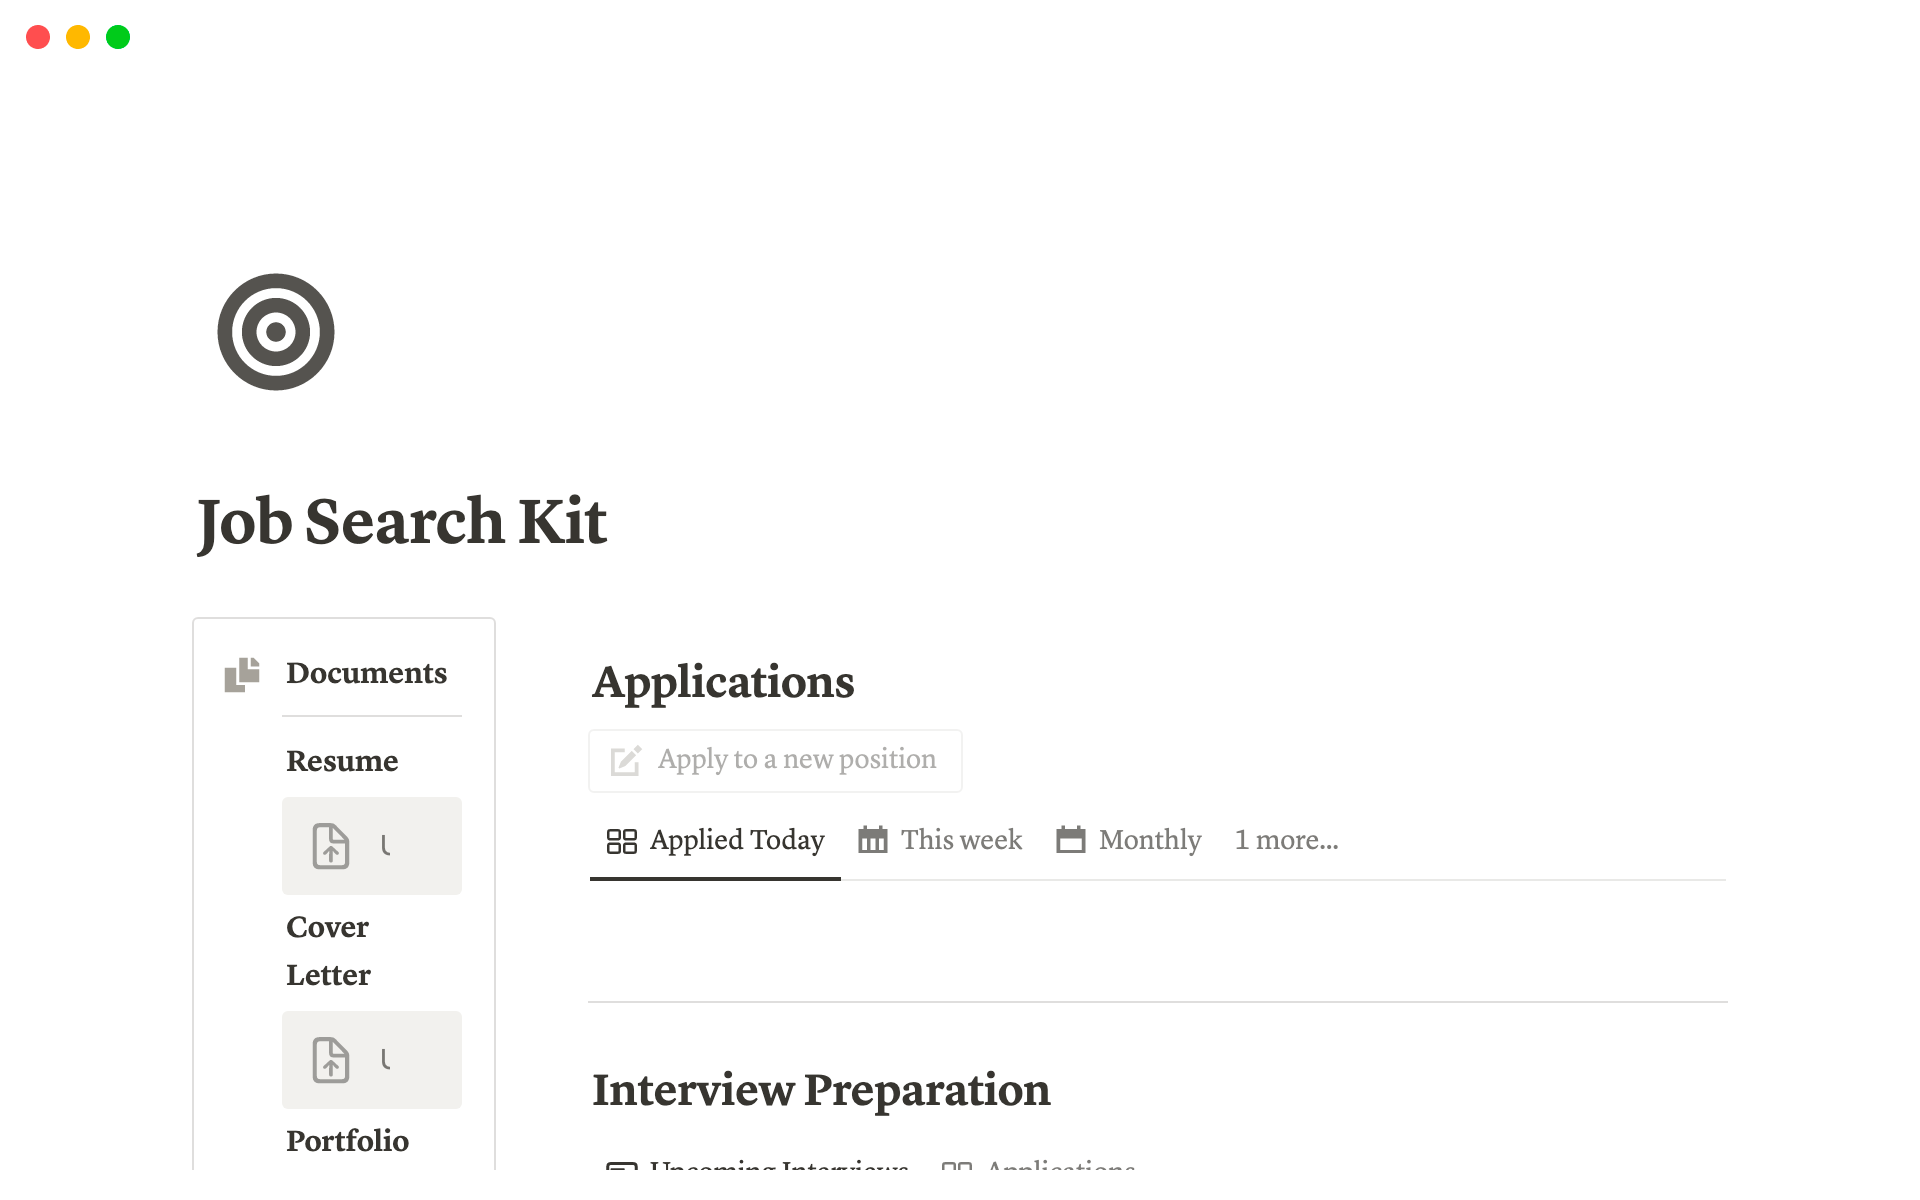 The Notion Job Search Kit centralizes job hunting efforts, providing a single, organized space to manage applications, track networking connections, prepare for interviews, and monitor personal career goals.